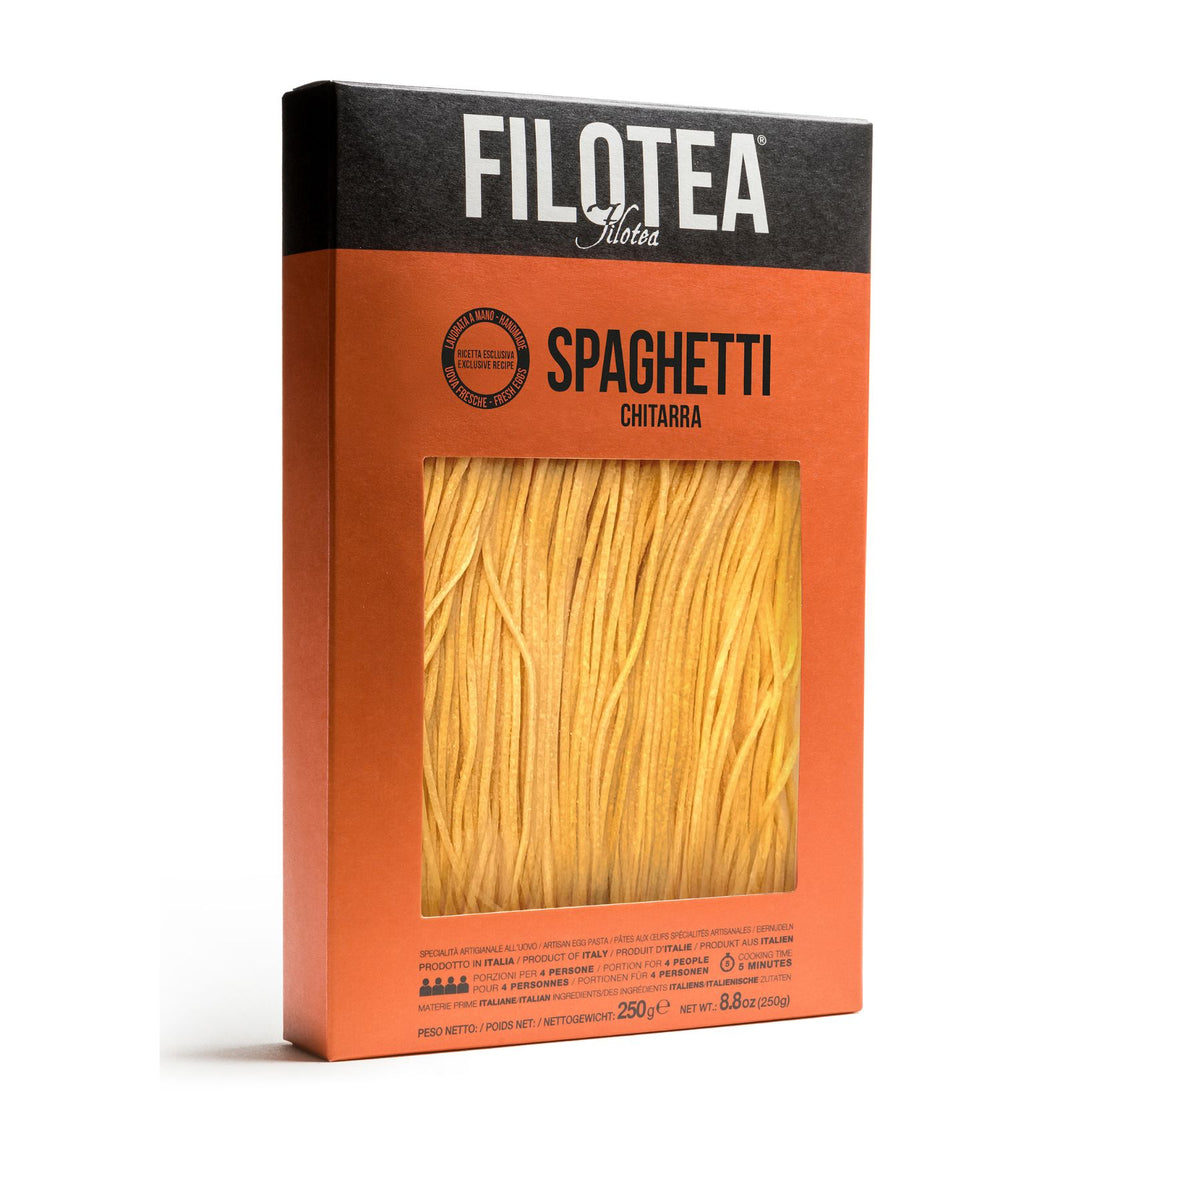 Filotea Spaghetti alla Chitarra Artisan Egg Pasta 250g | Imported and distributed in the UK by Just Gourmet Foods